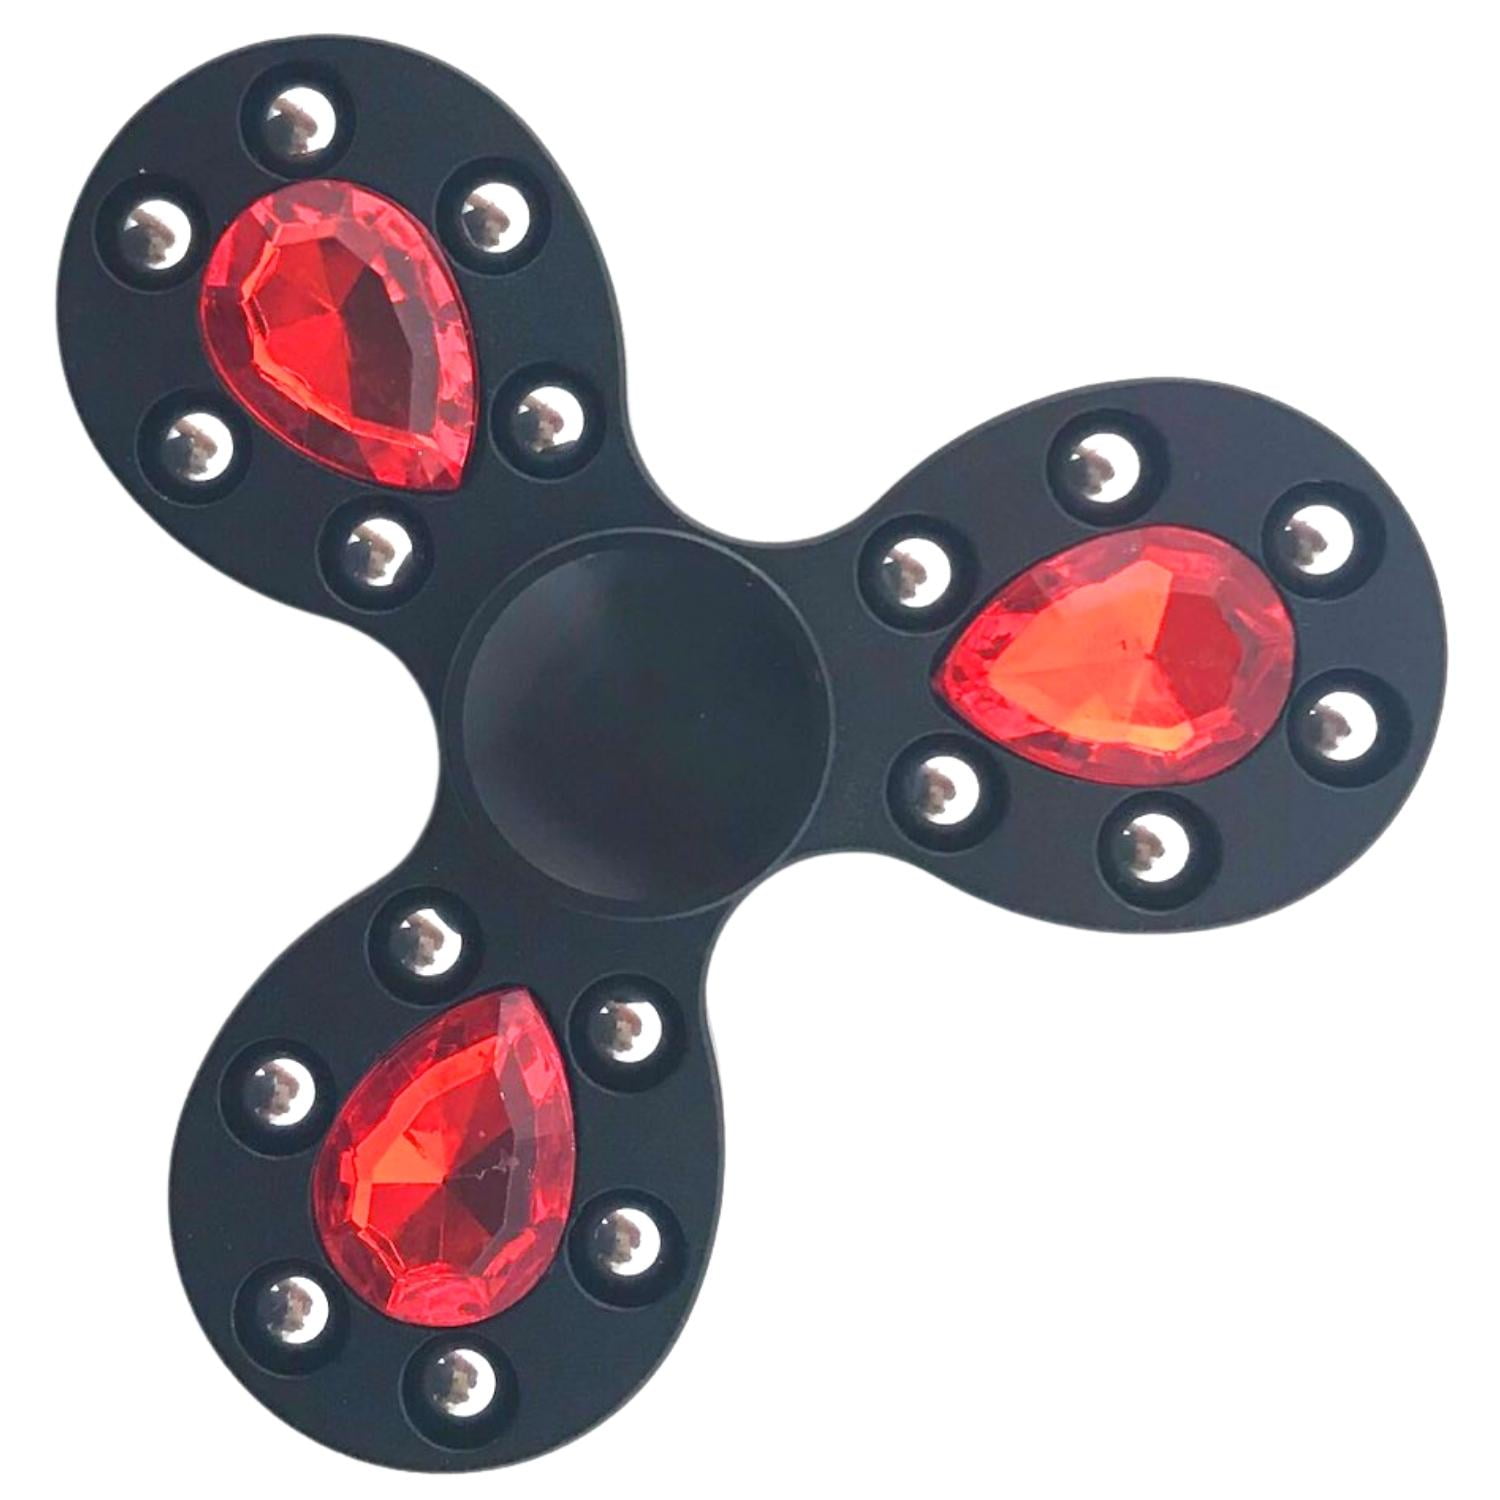 Pink Fidget Spinner Hand Toy BLING Stress Relief Focus Metallic ADHD Anxiety 